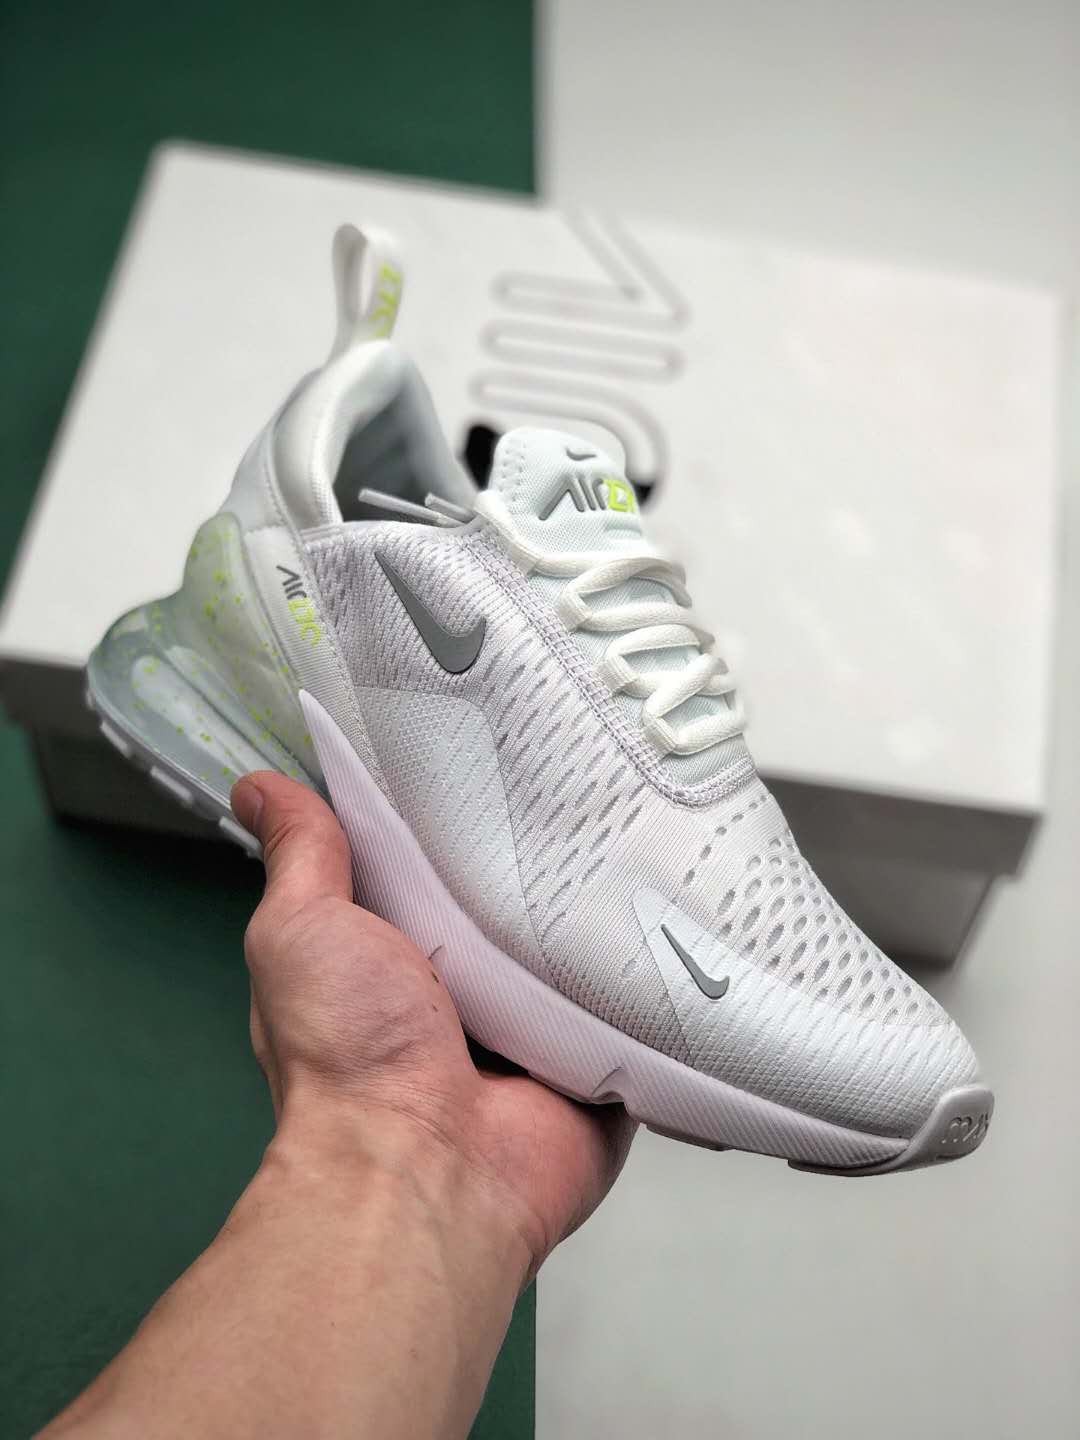 Nike Air Max 270 White Volt Metallic Silver Shoes CI2671-100 - Sleek and Stylish Footwear with Superior Comfort